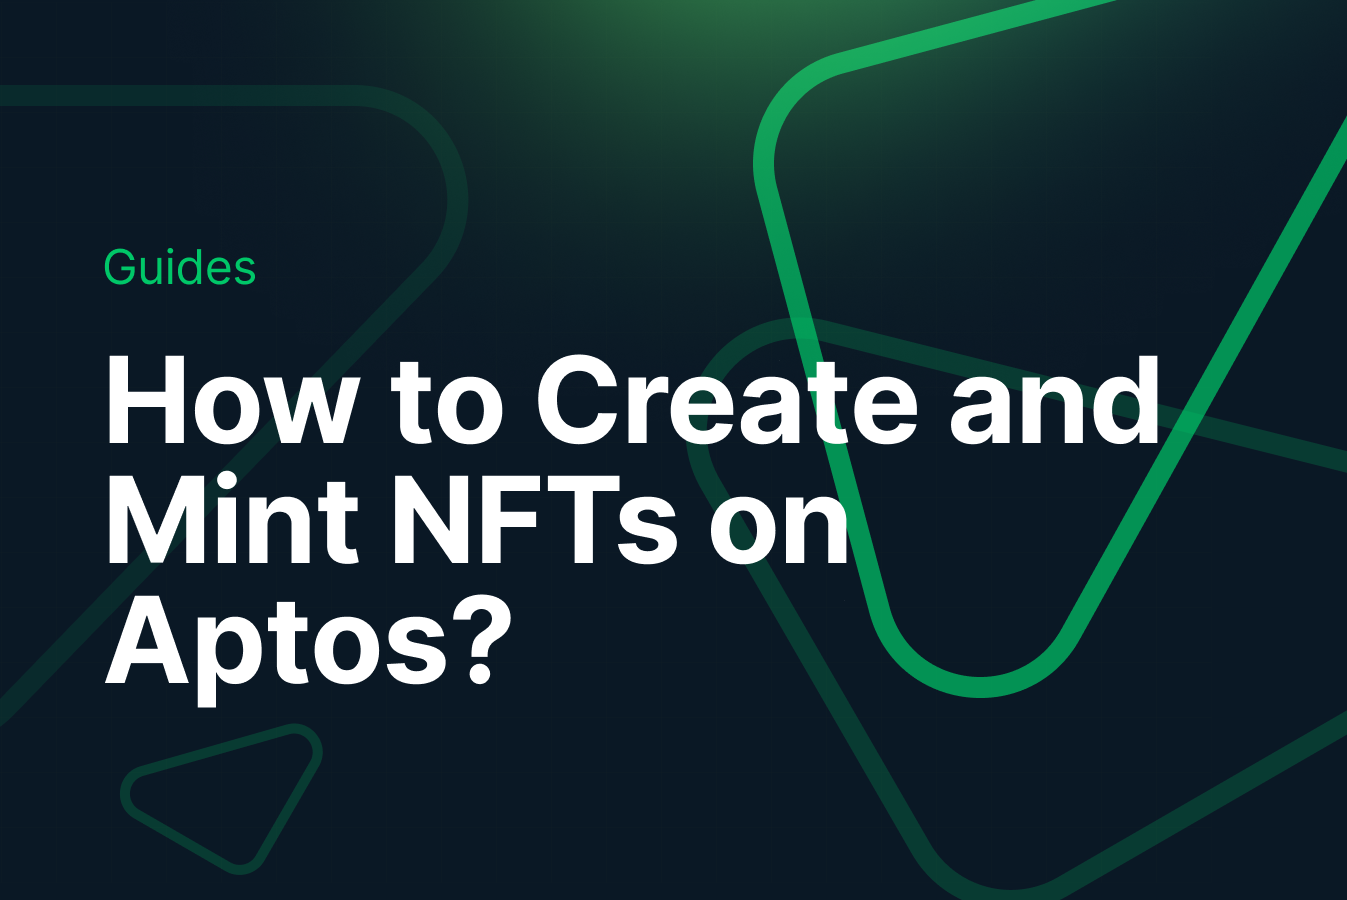 How to Create and Mint NFTs on Aptos?